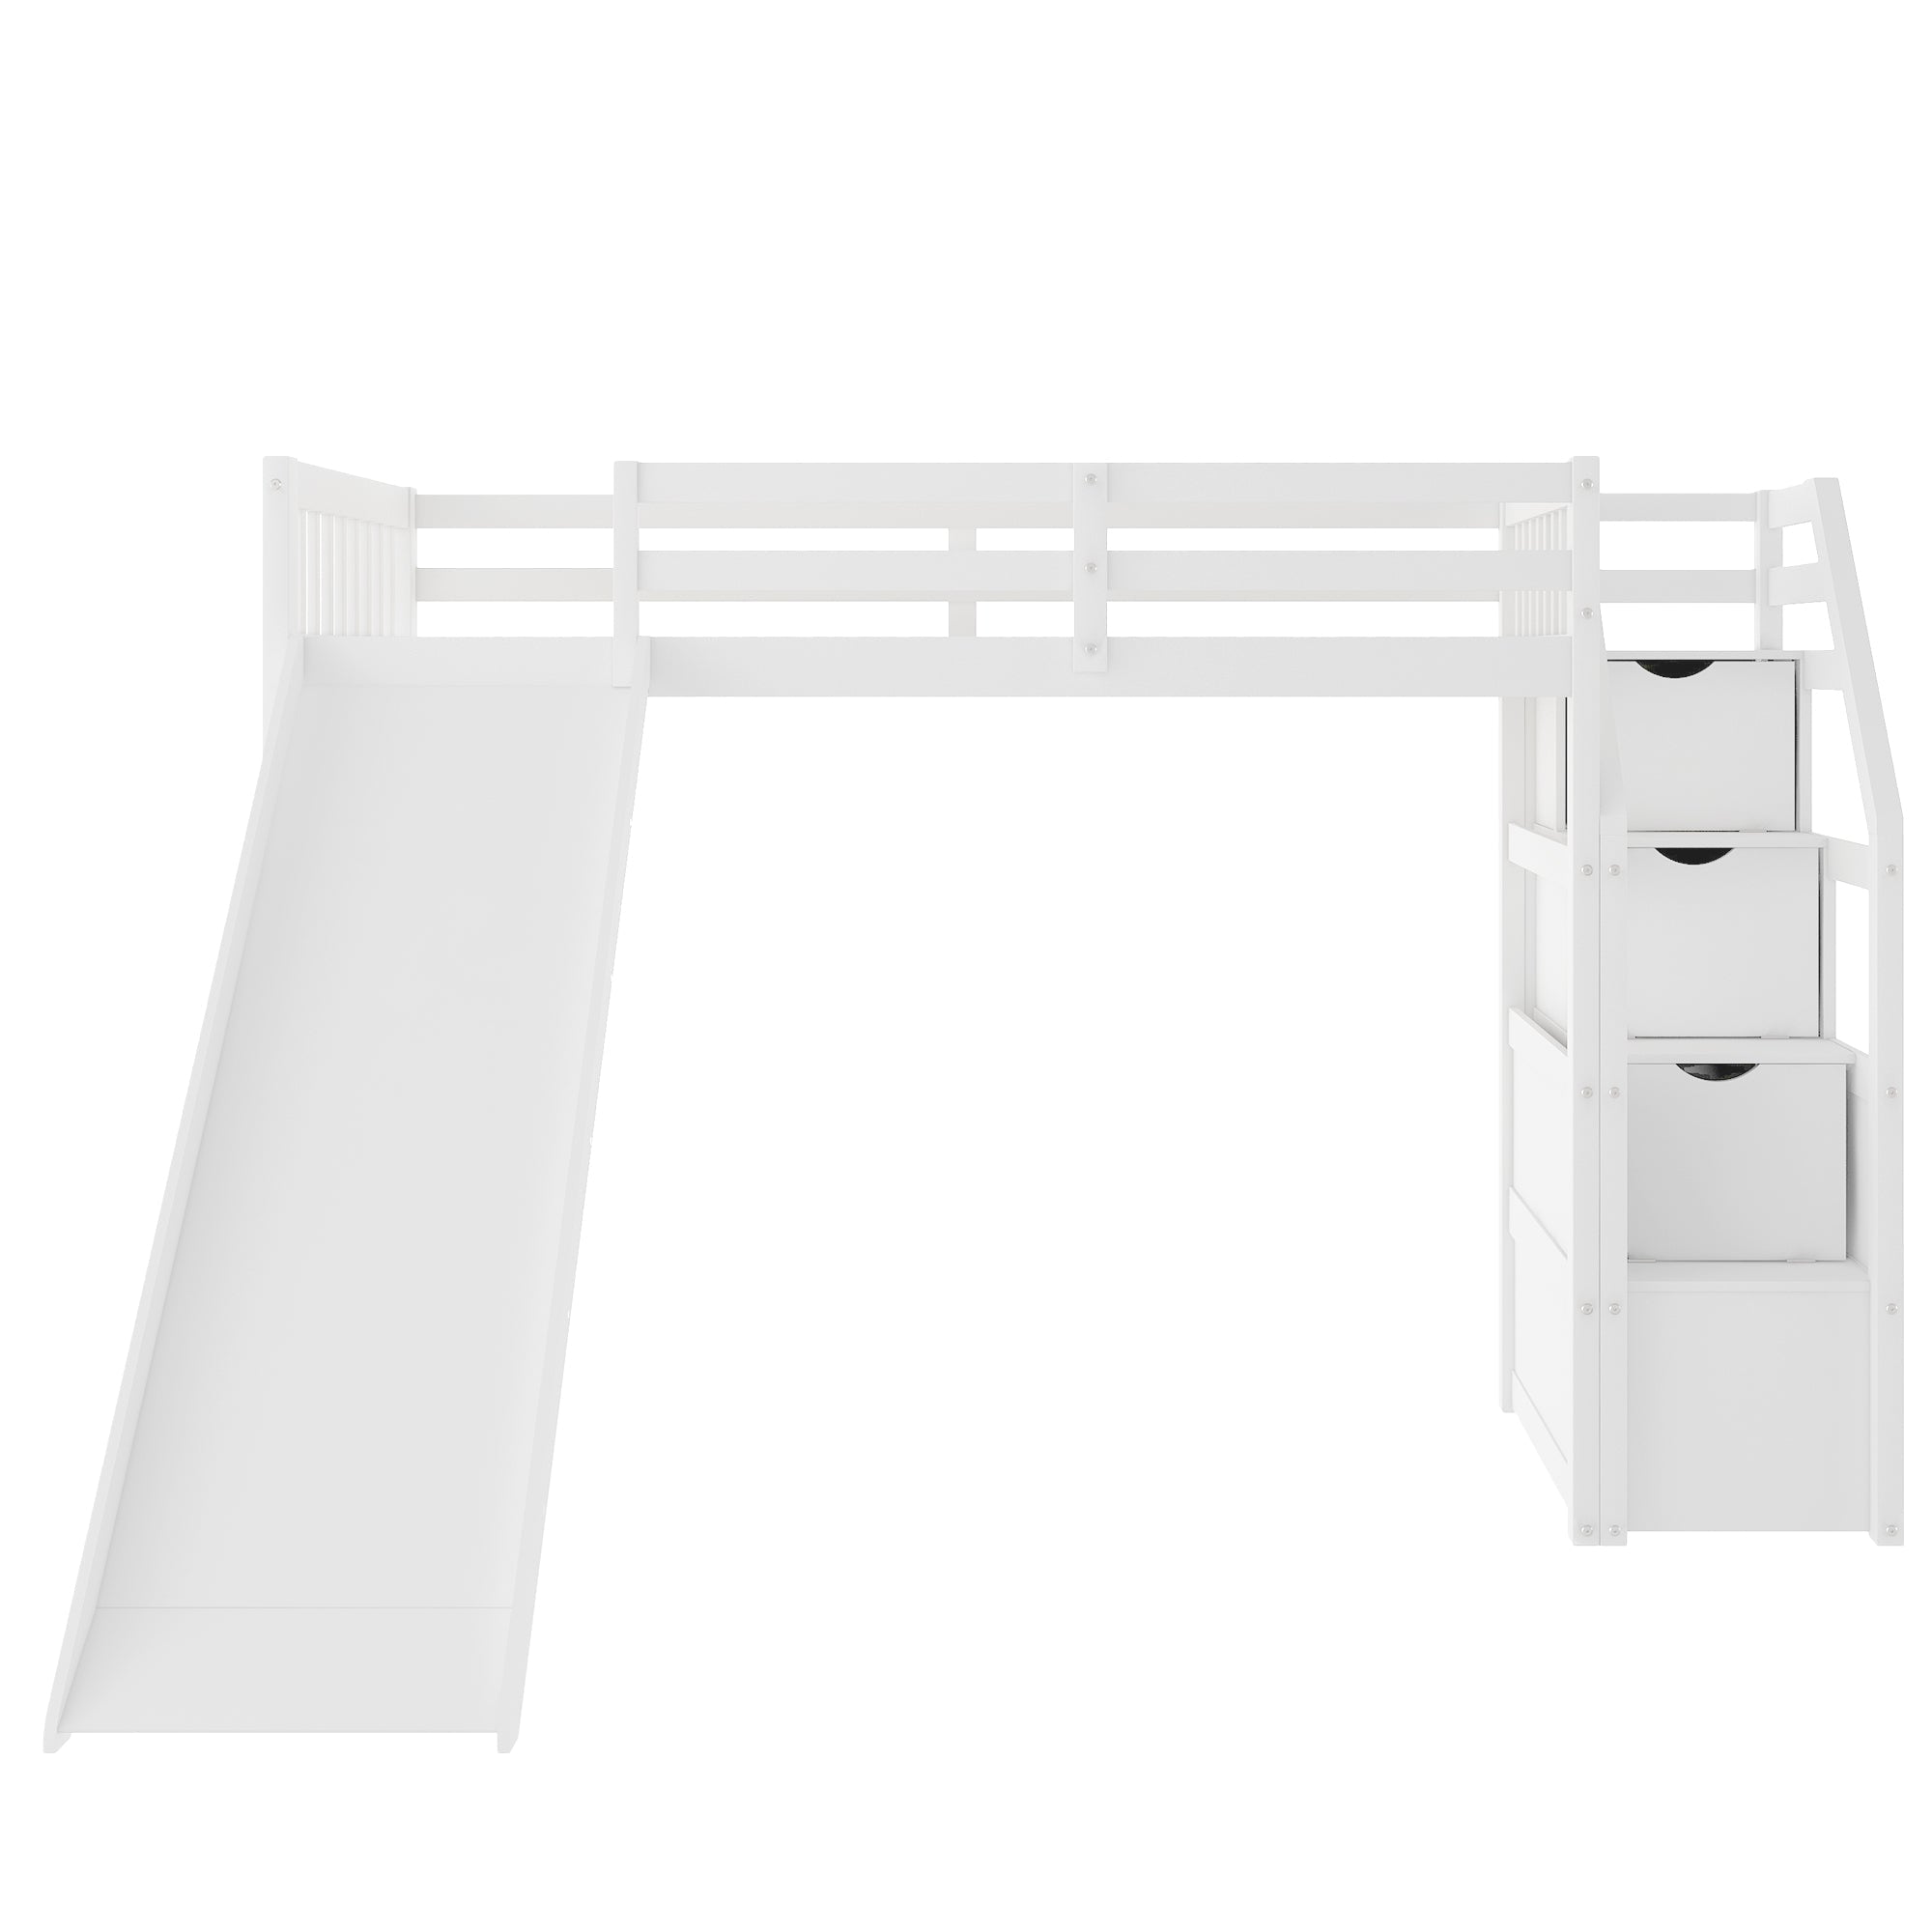 Euroco Wood Twin Size Loft Bed with Slide and Drawers for Child, White